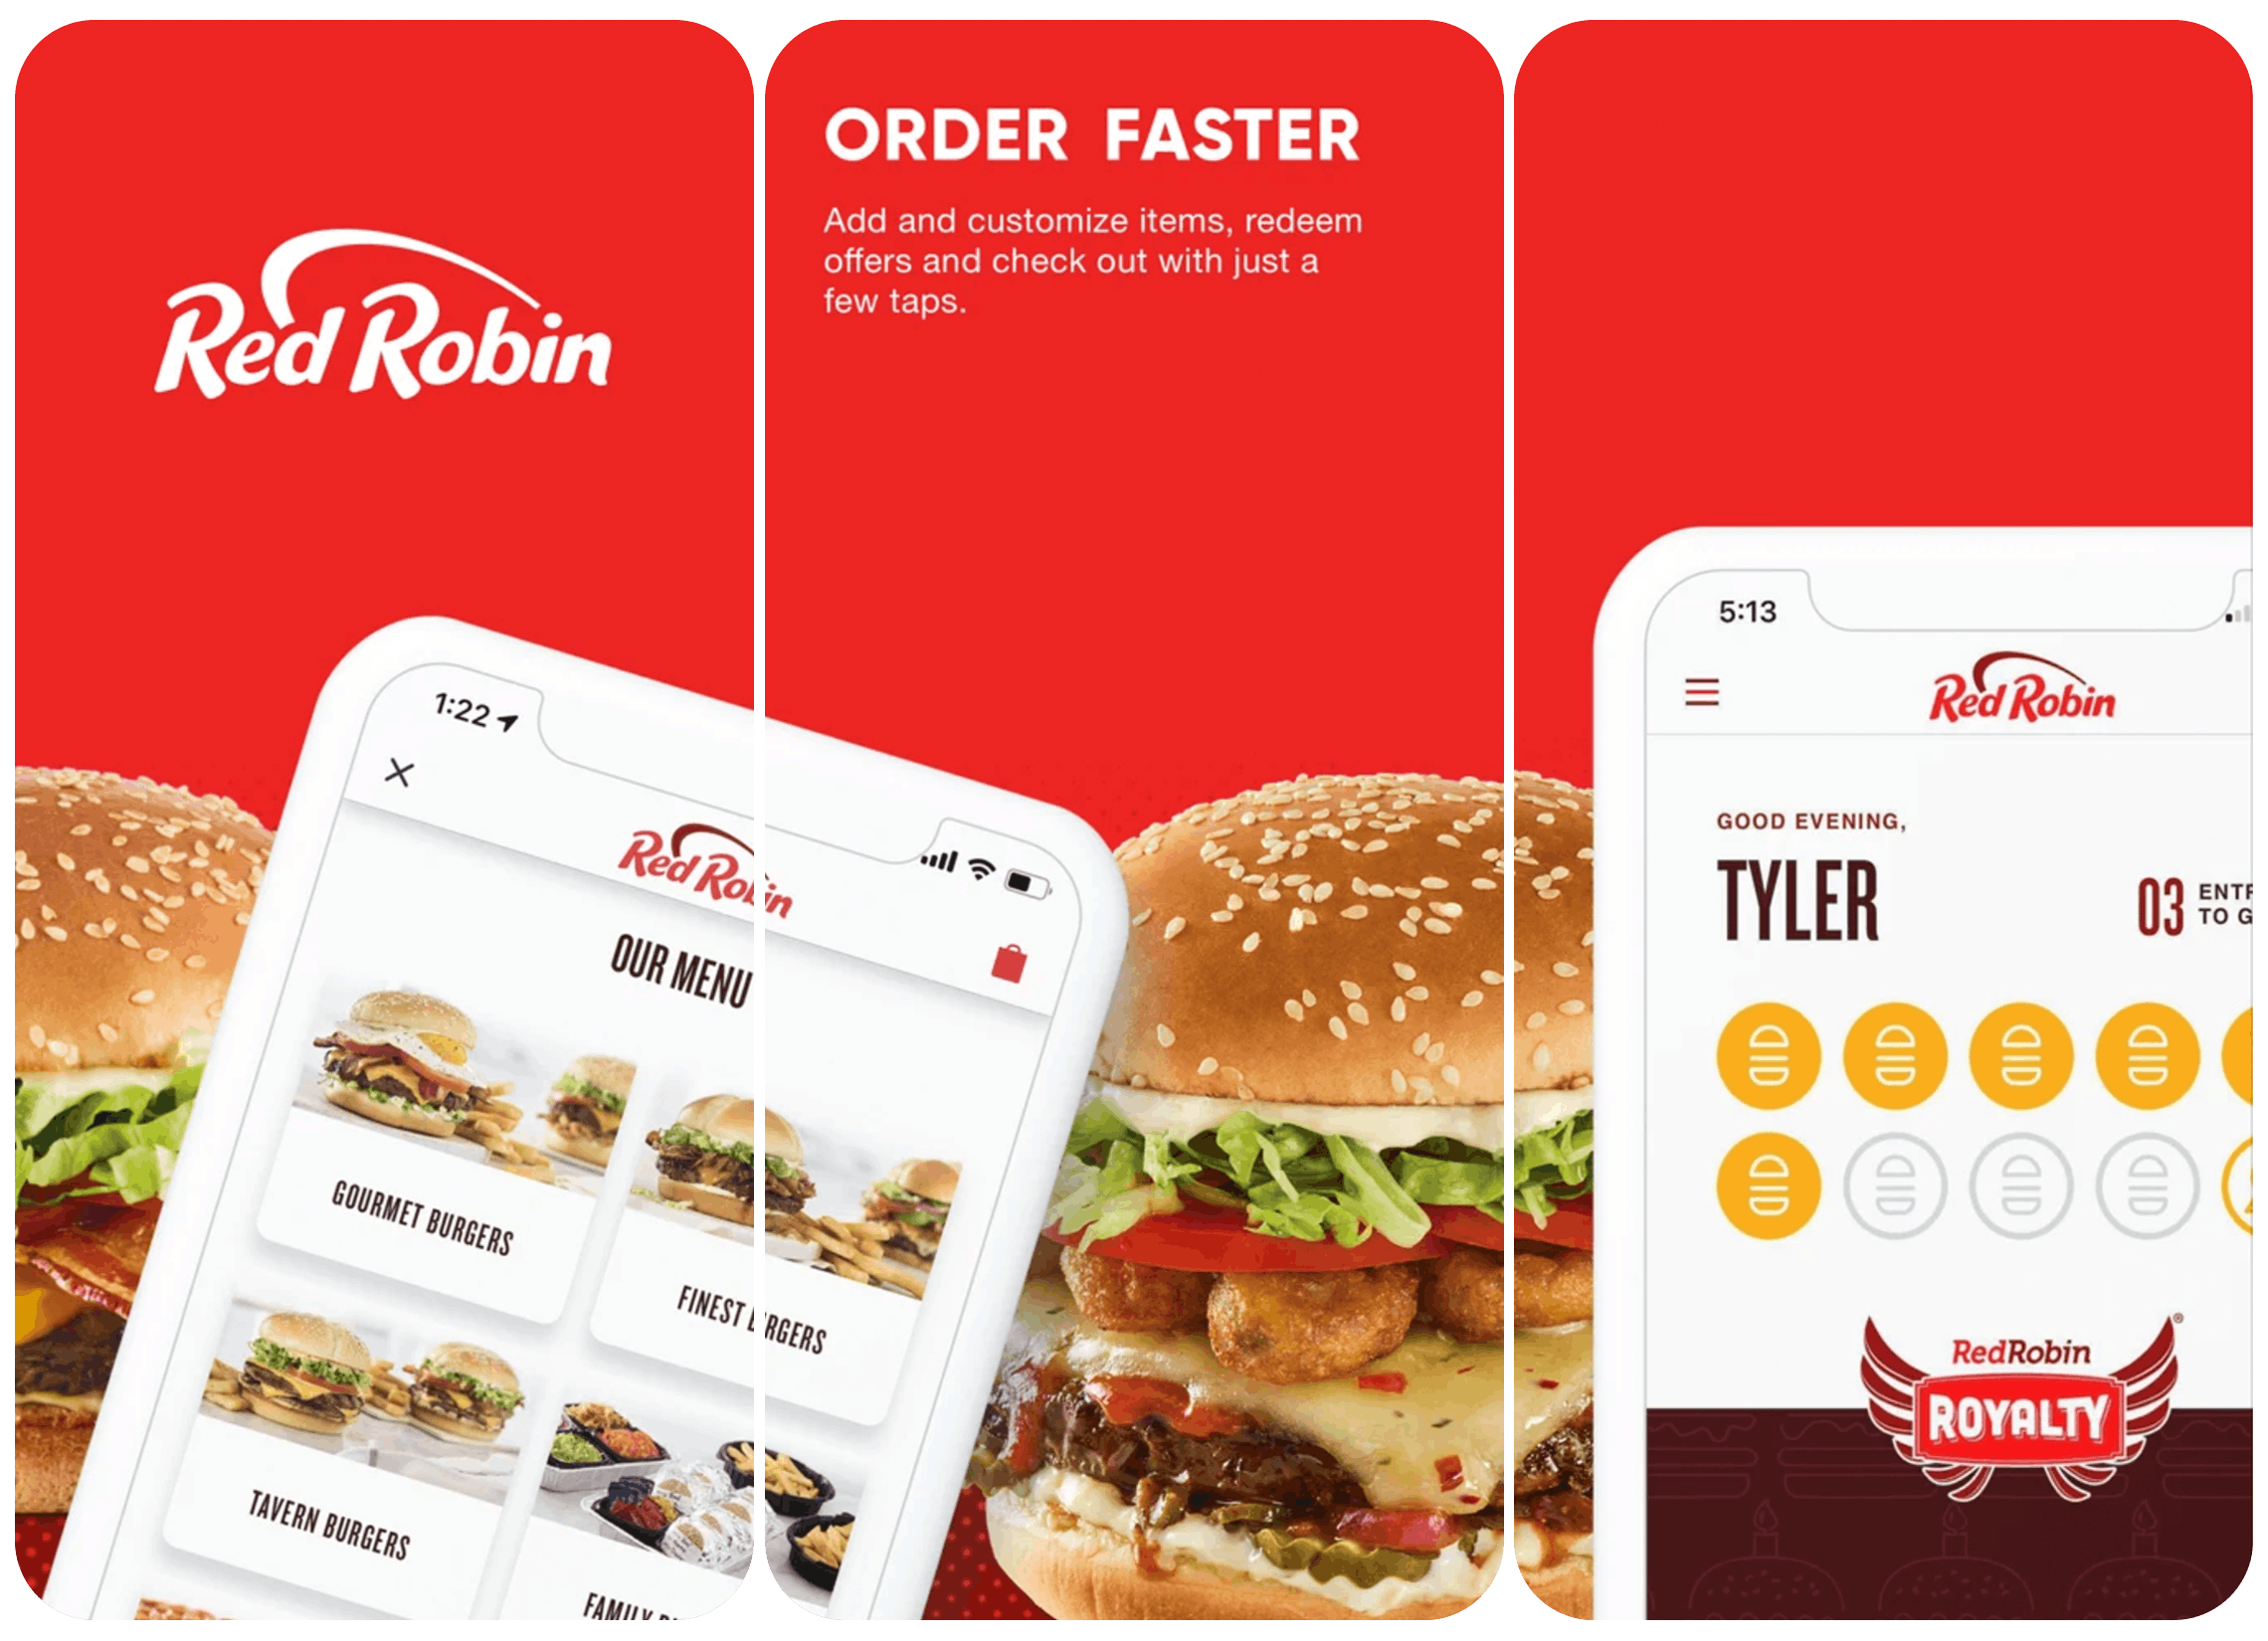 A screenshot advertising the Red Robin mobile app, with a graphic of two iPhones displaying the menu and rewards page, and two burgers in the background.